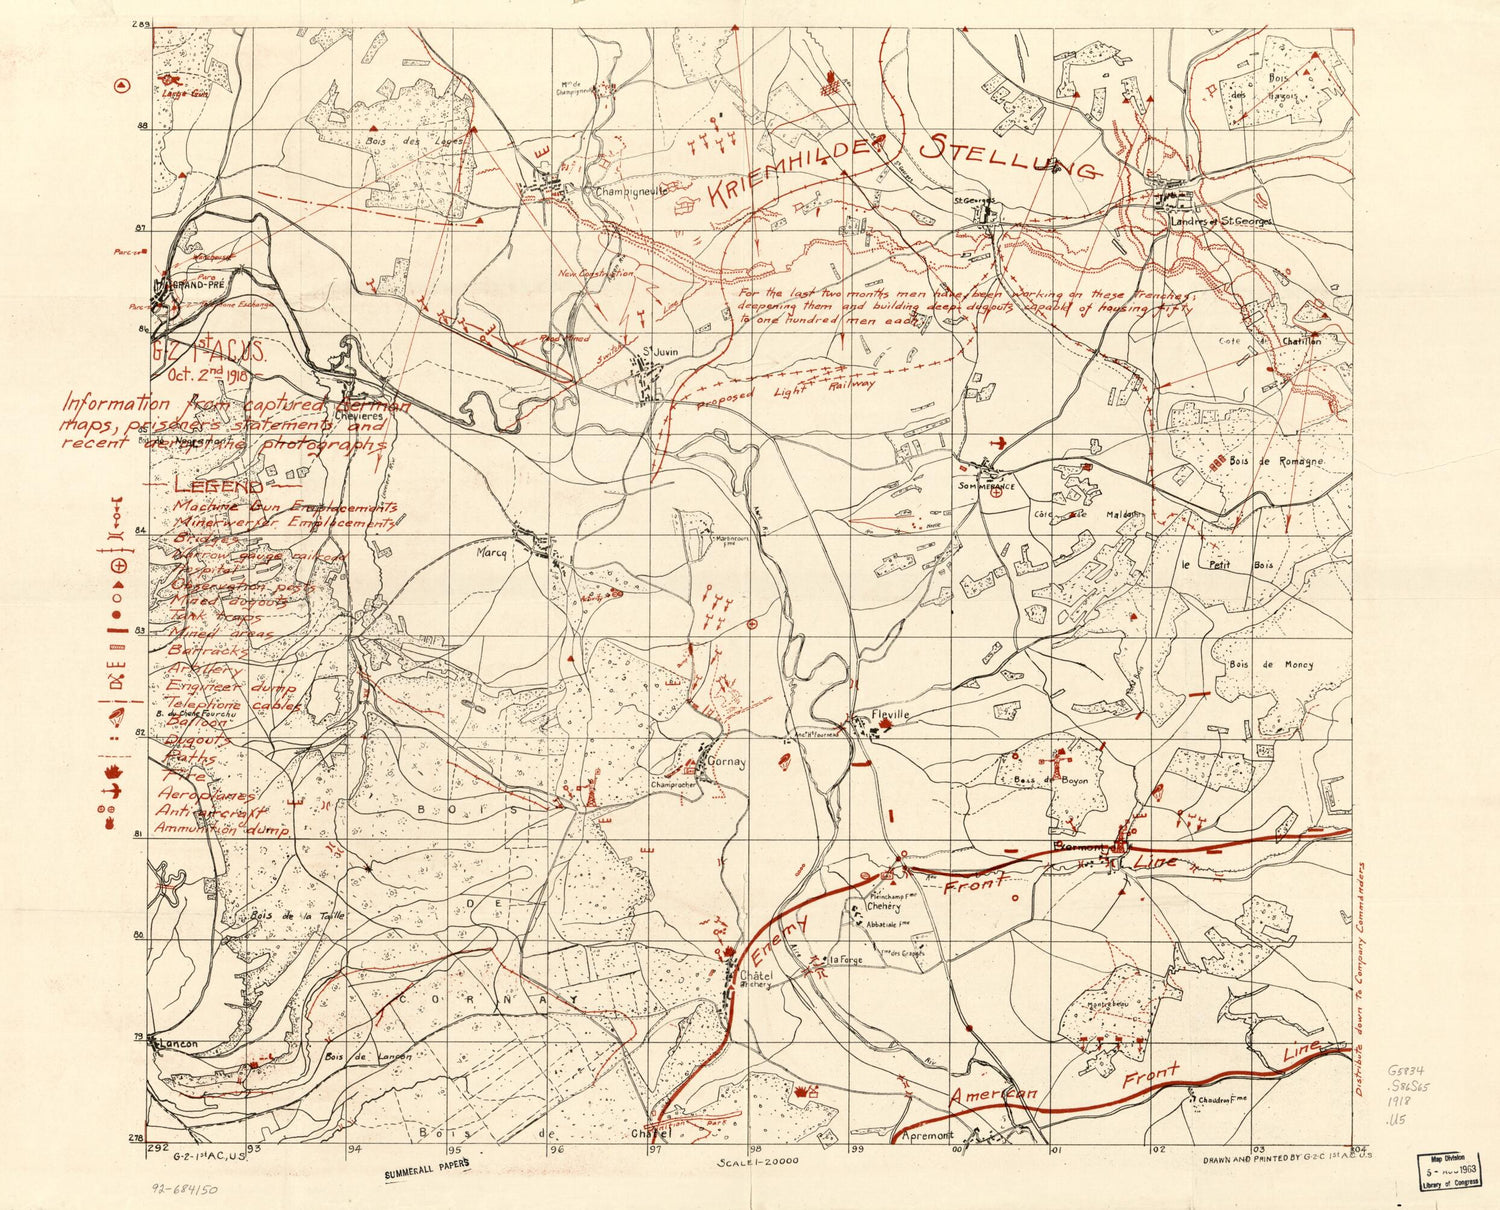 This old map of Information from Captured German Maps, Prisoner&